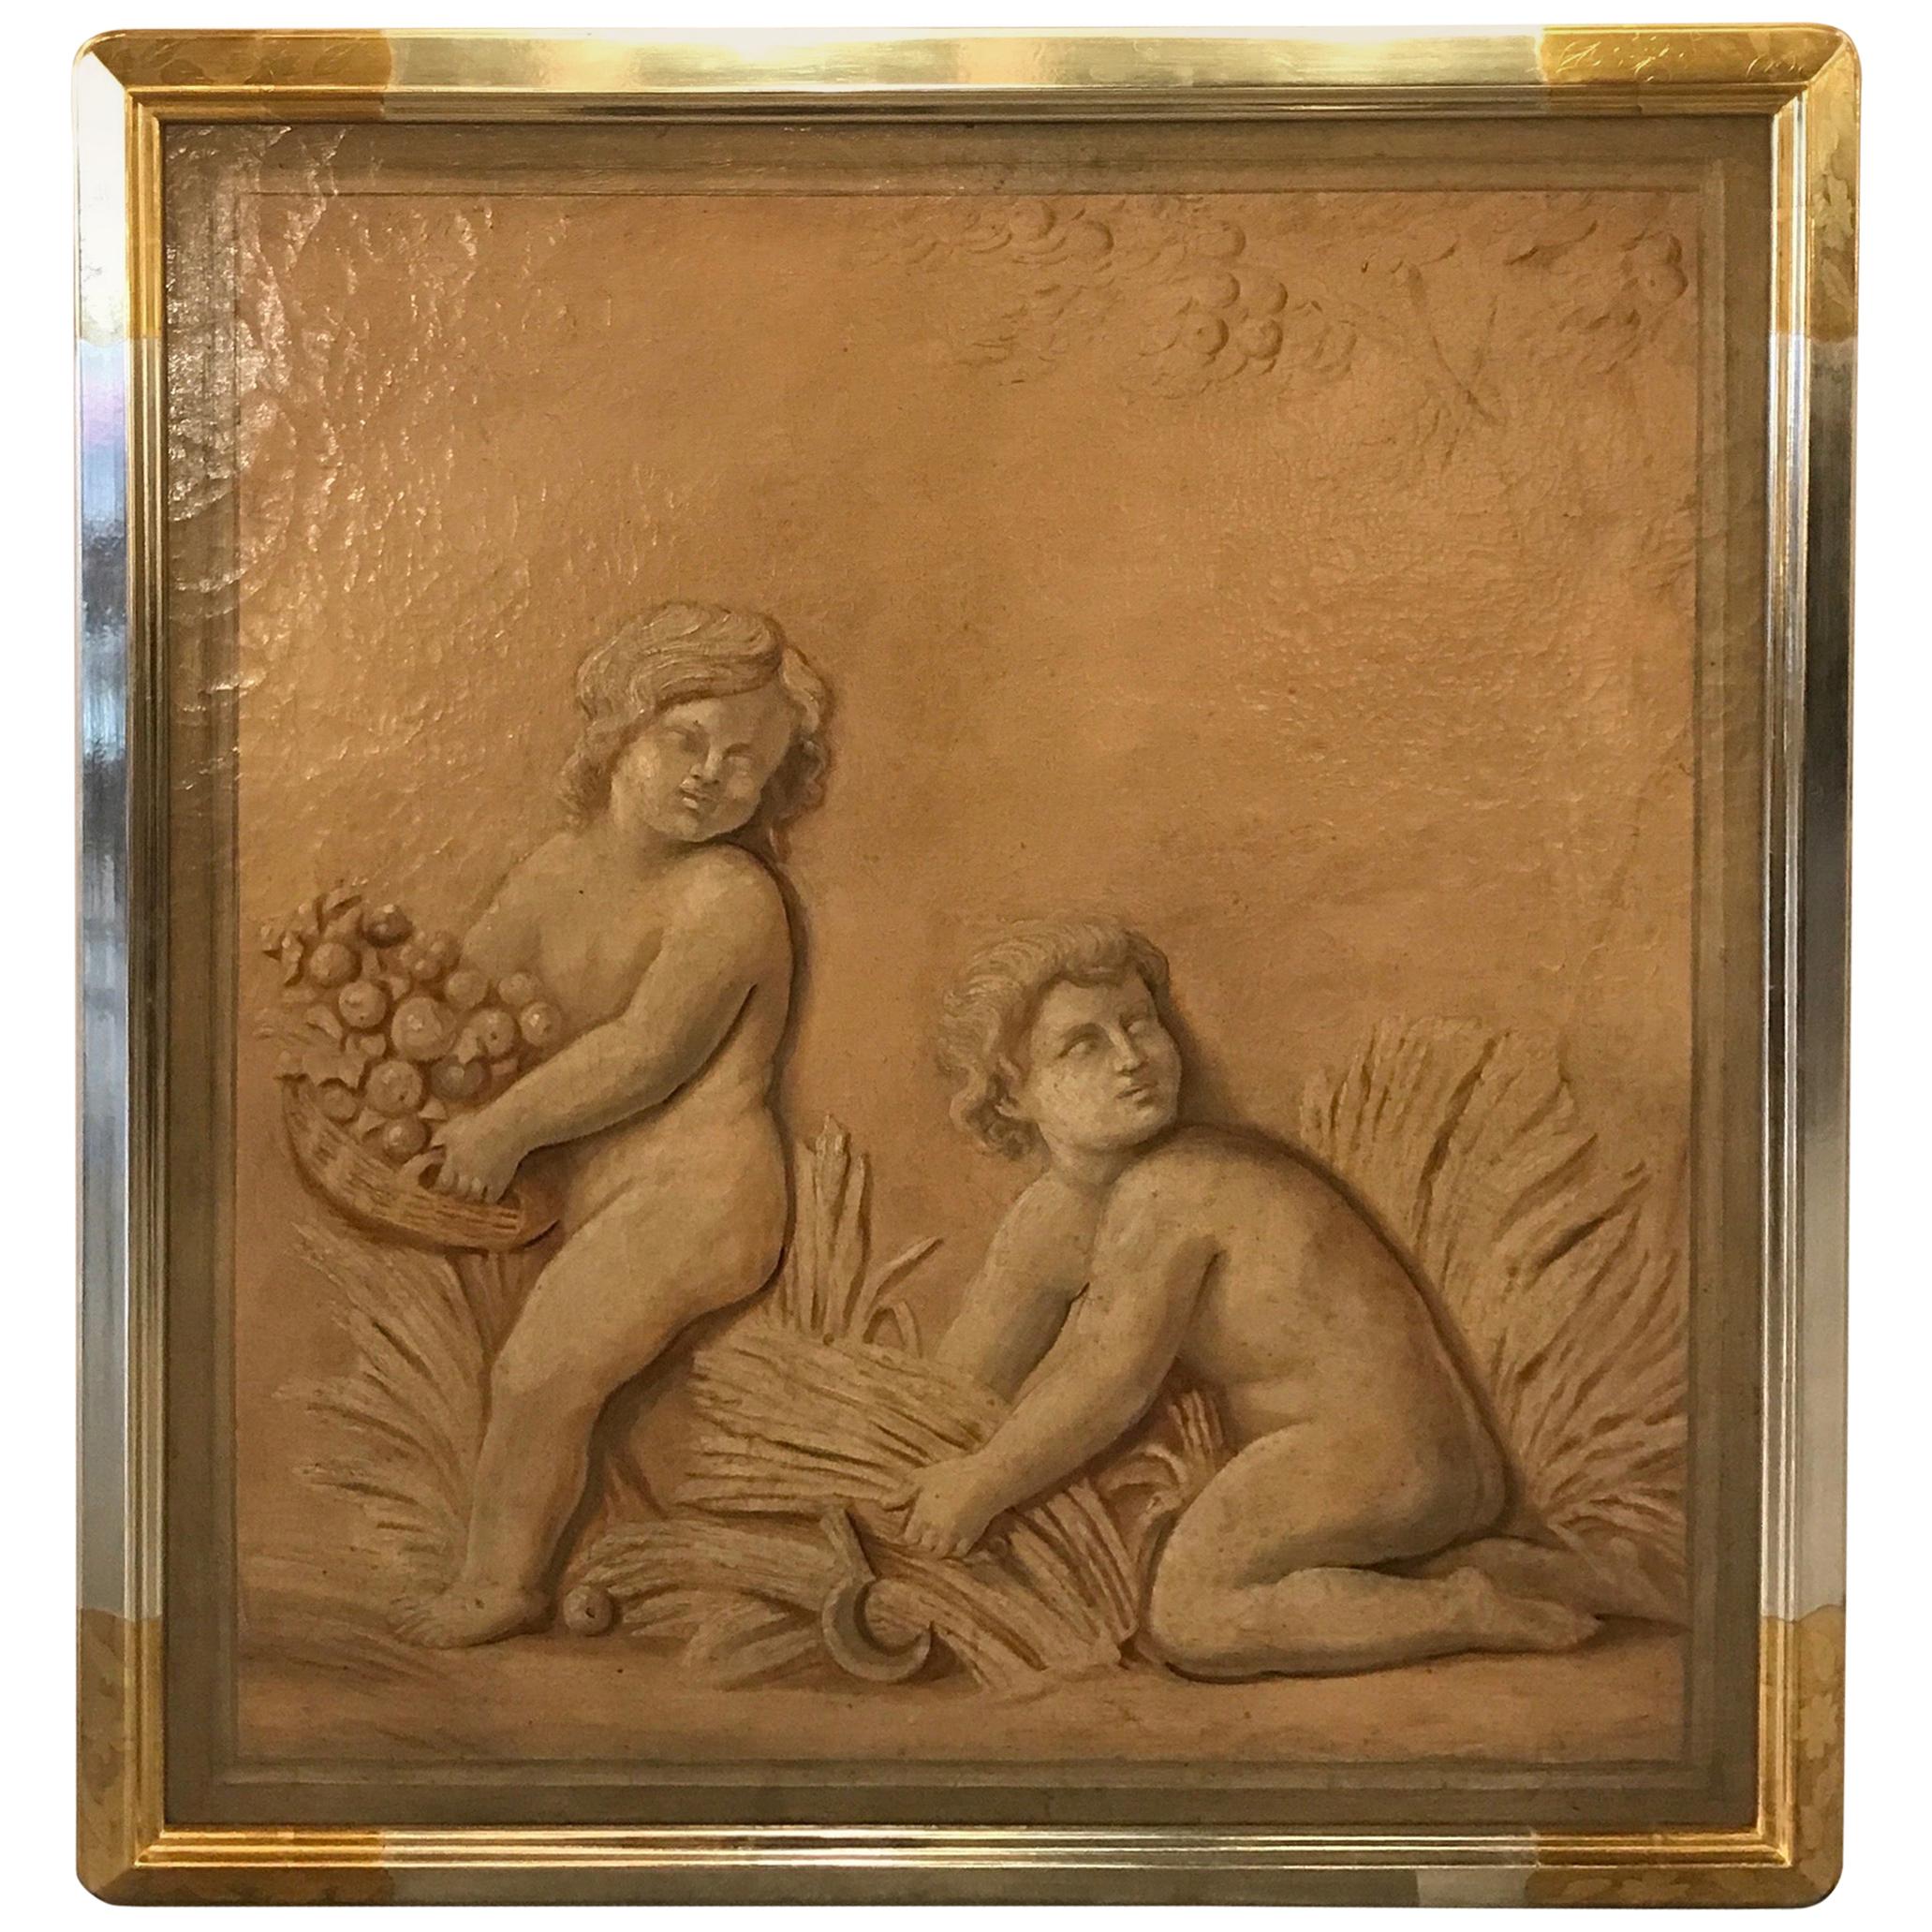 Large Italian Painting in Later Quality Frame